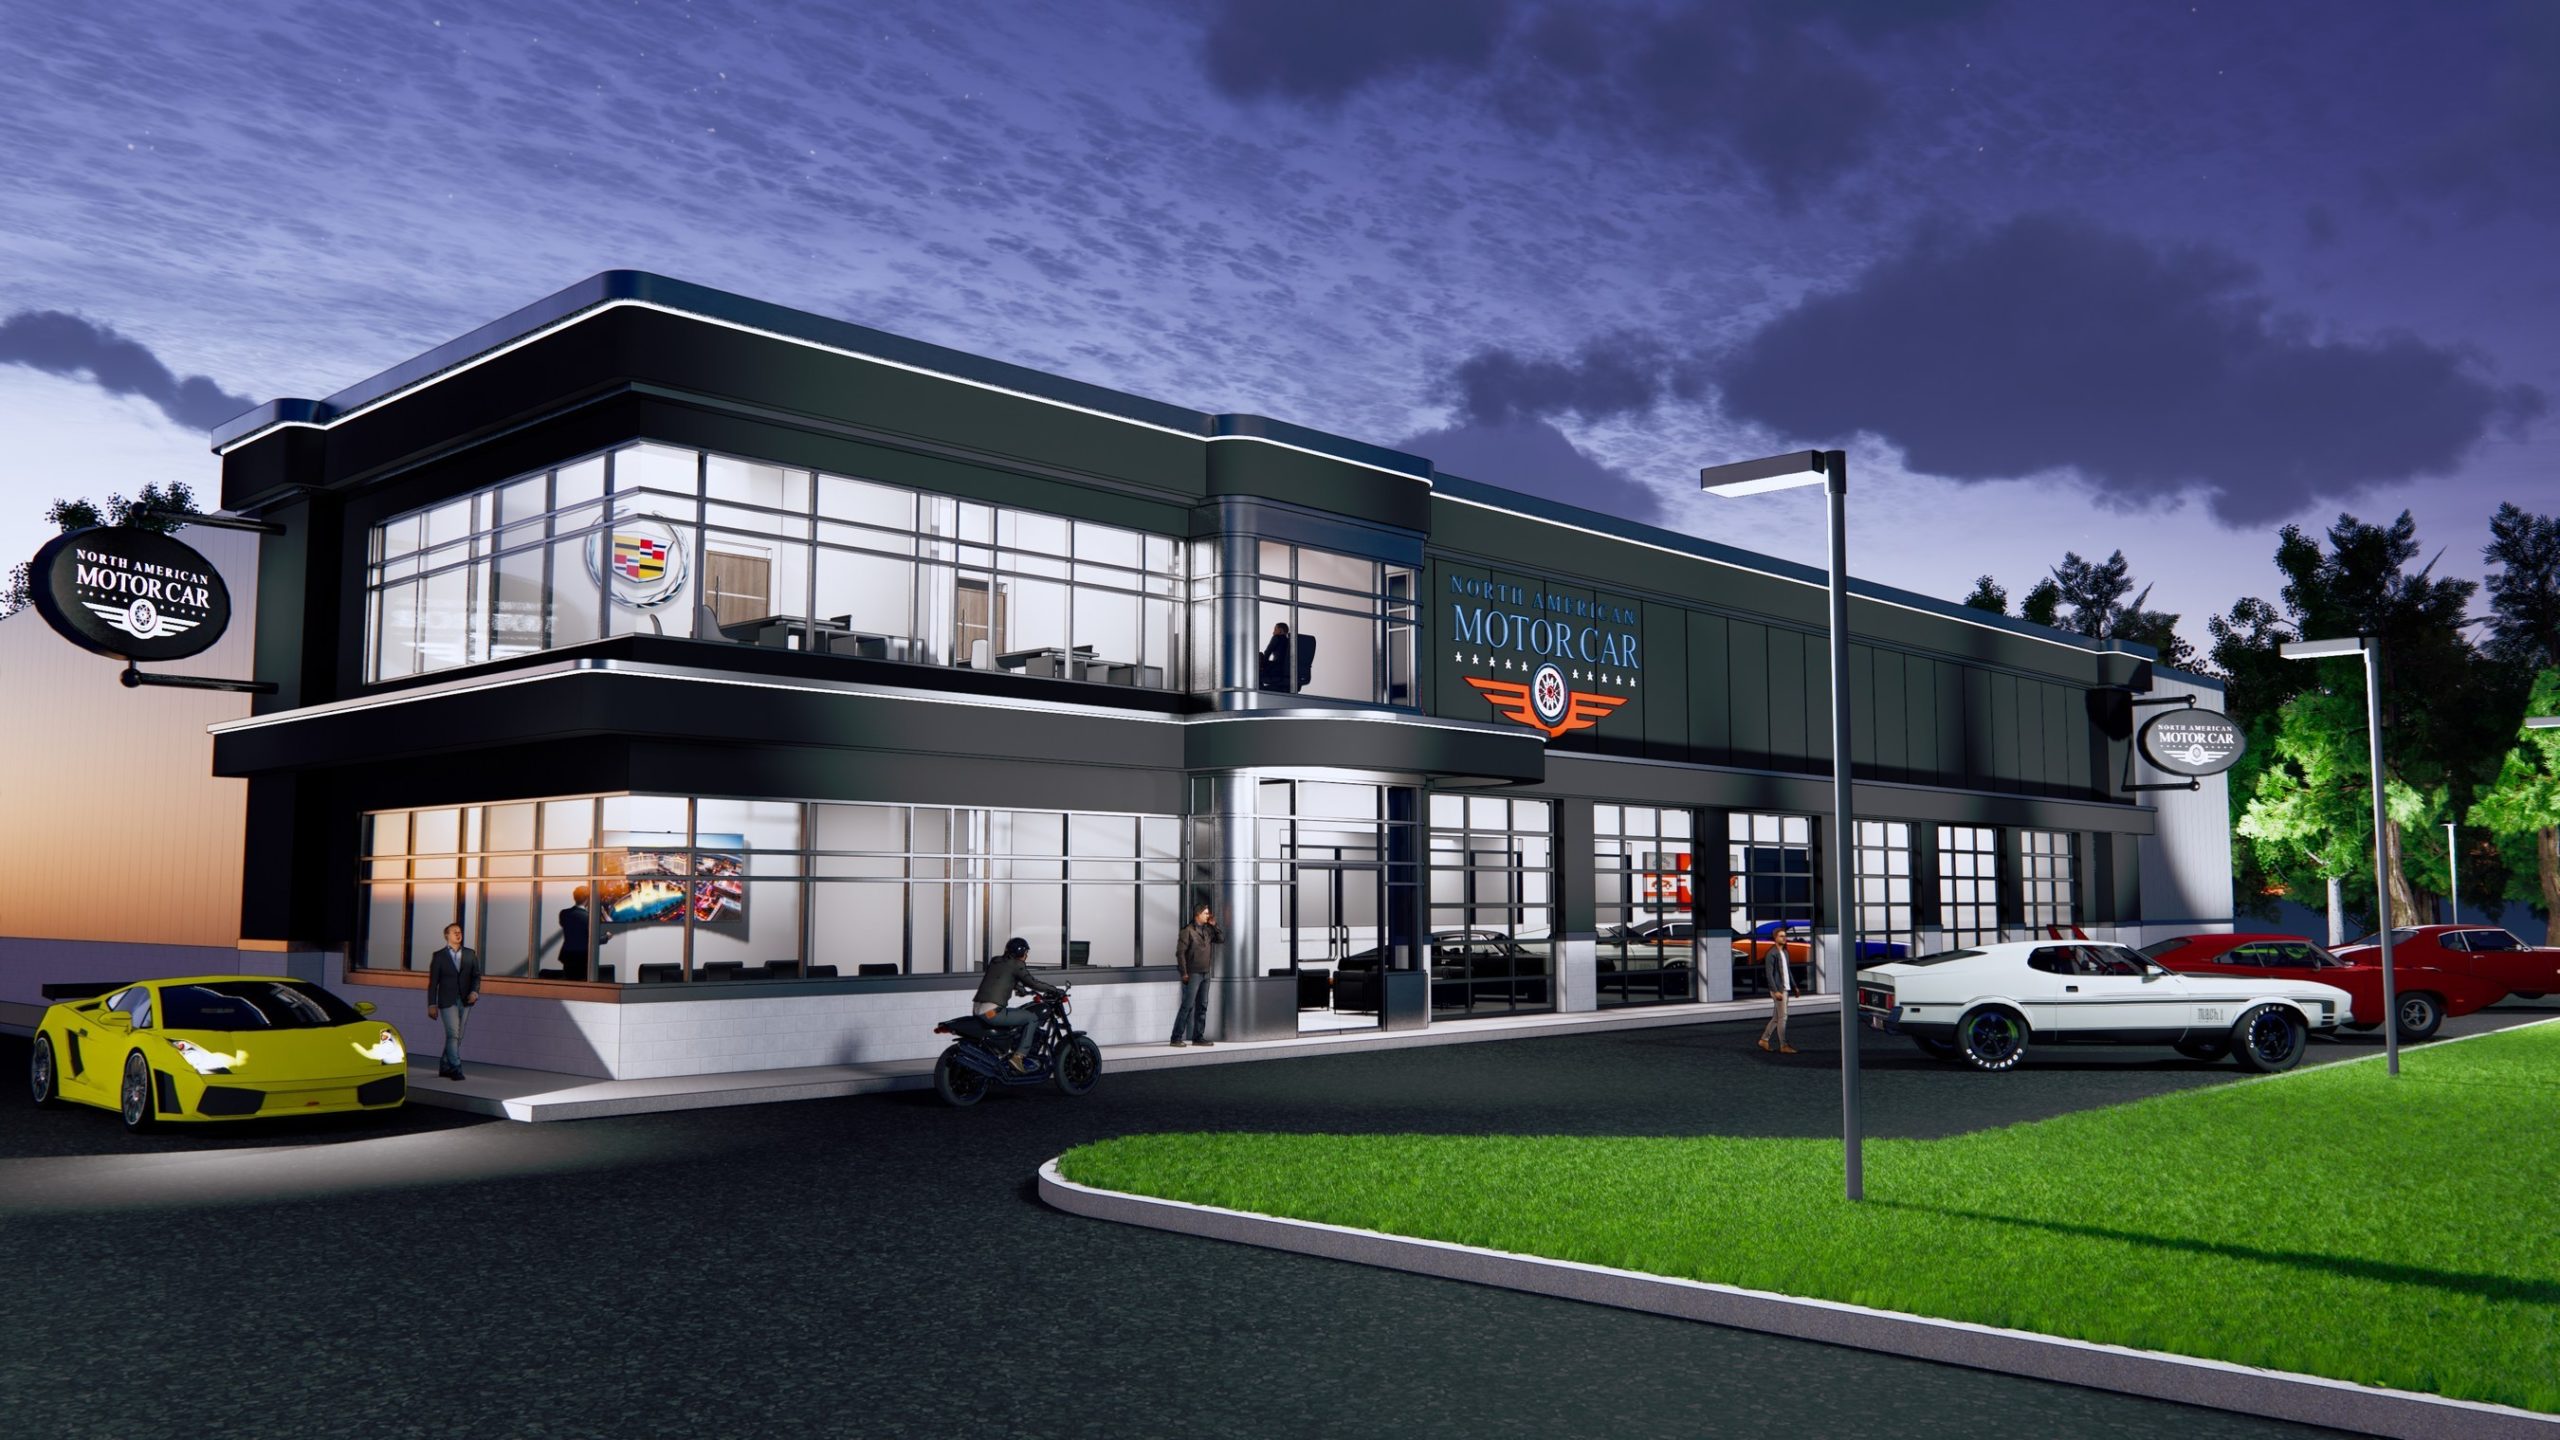 North American Motor Car Breaks Ground on New Facilities | THE SHOP